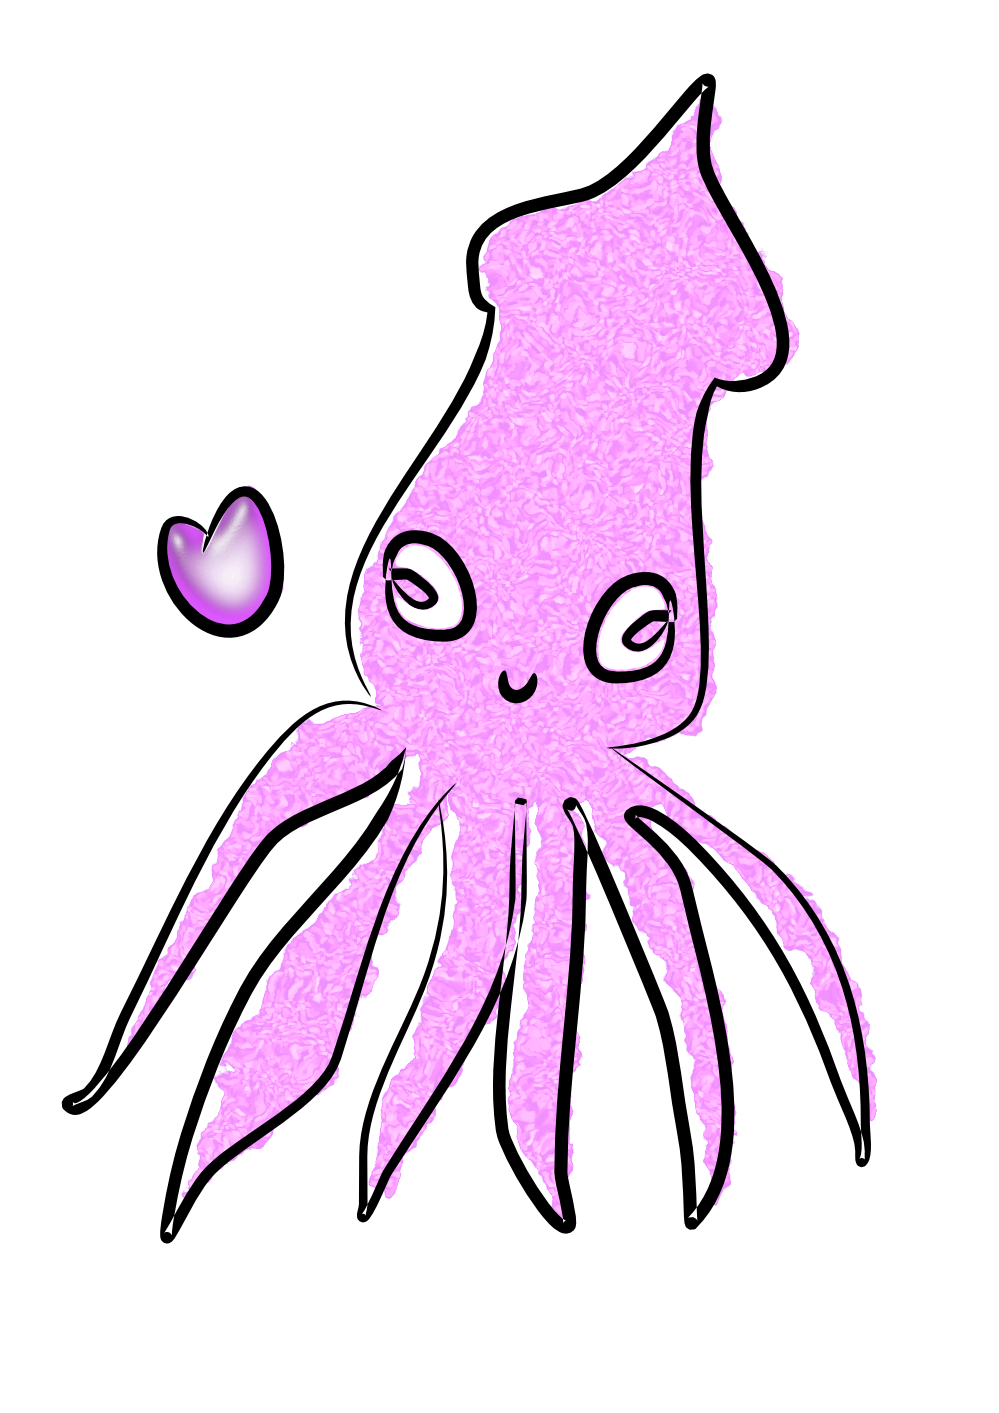 Squid svg #1, Download drawings